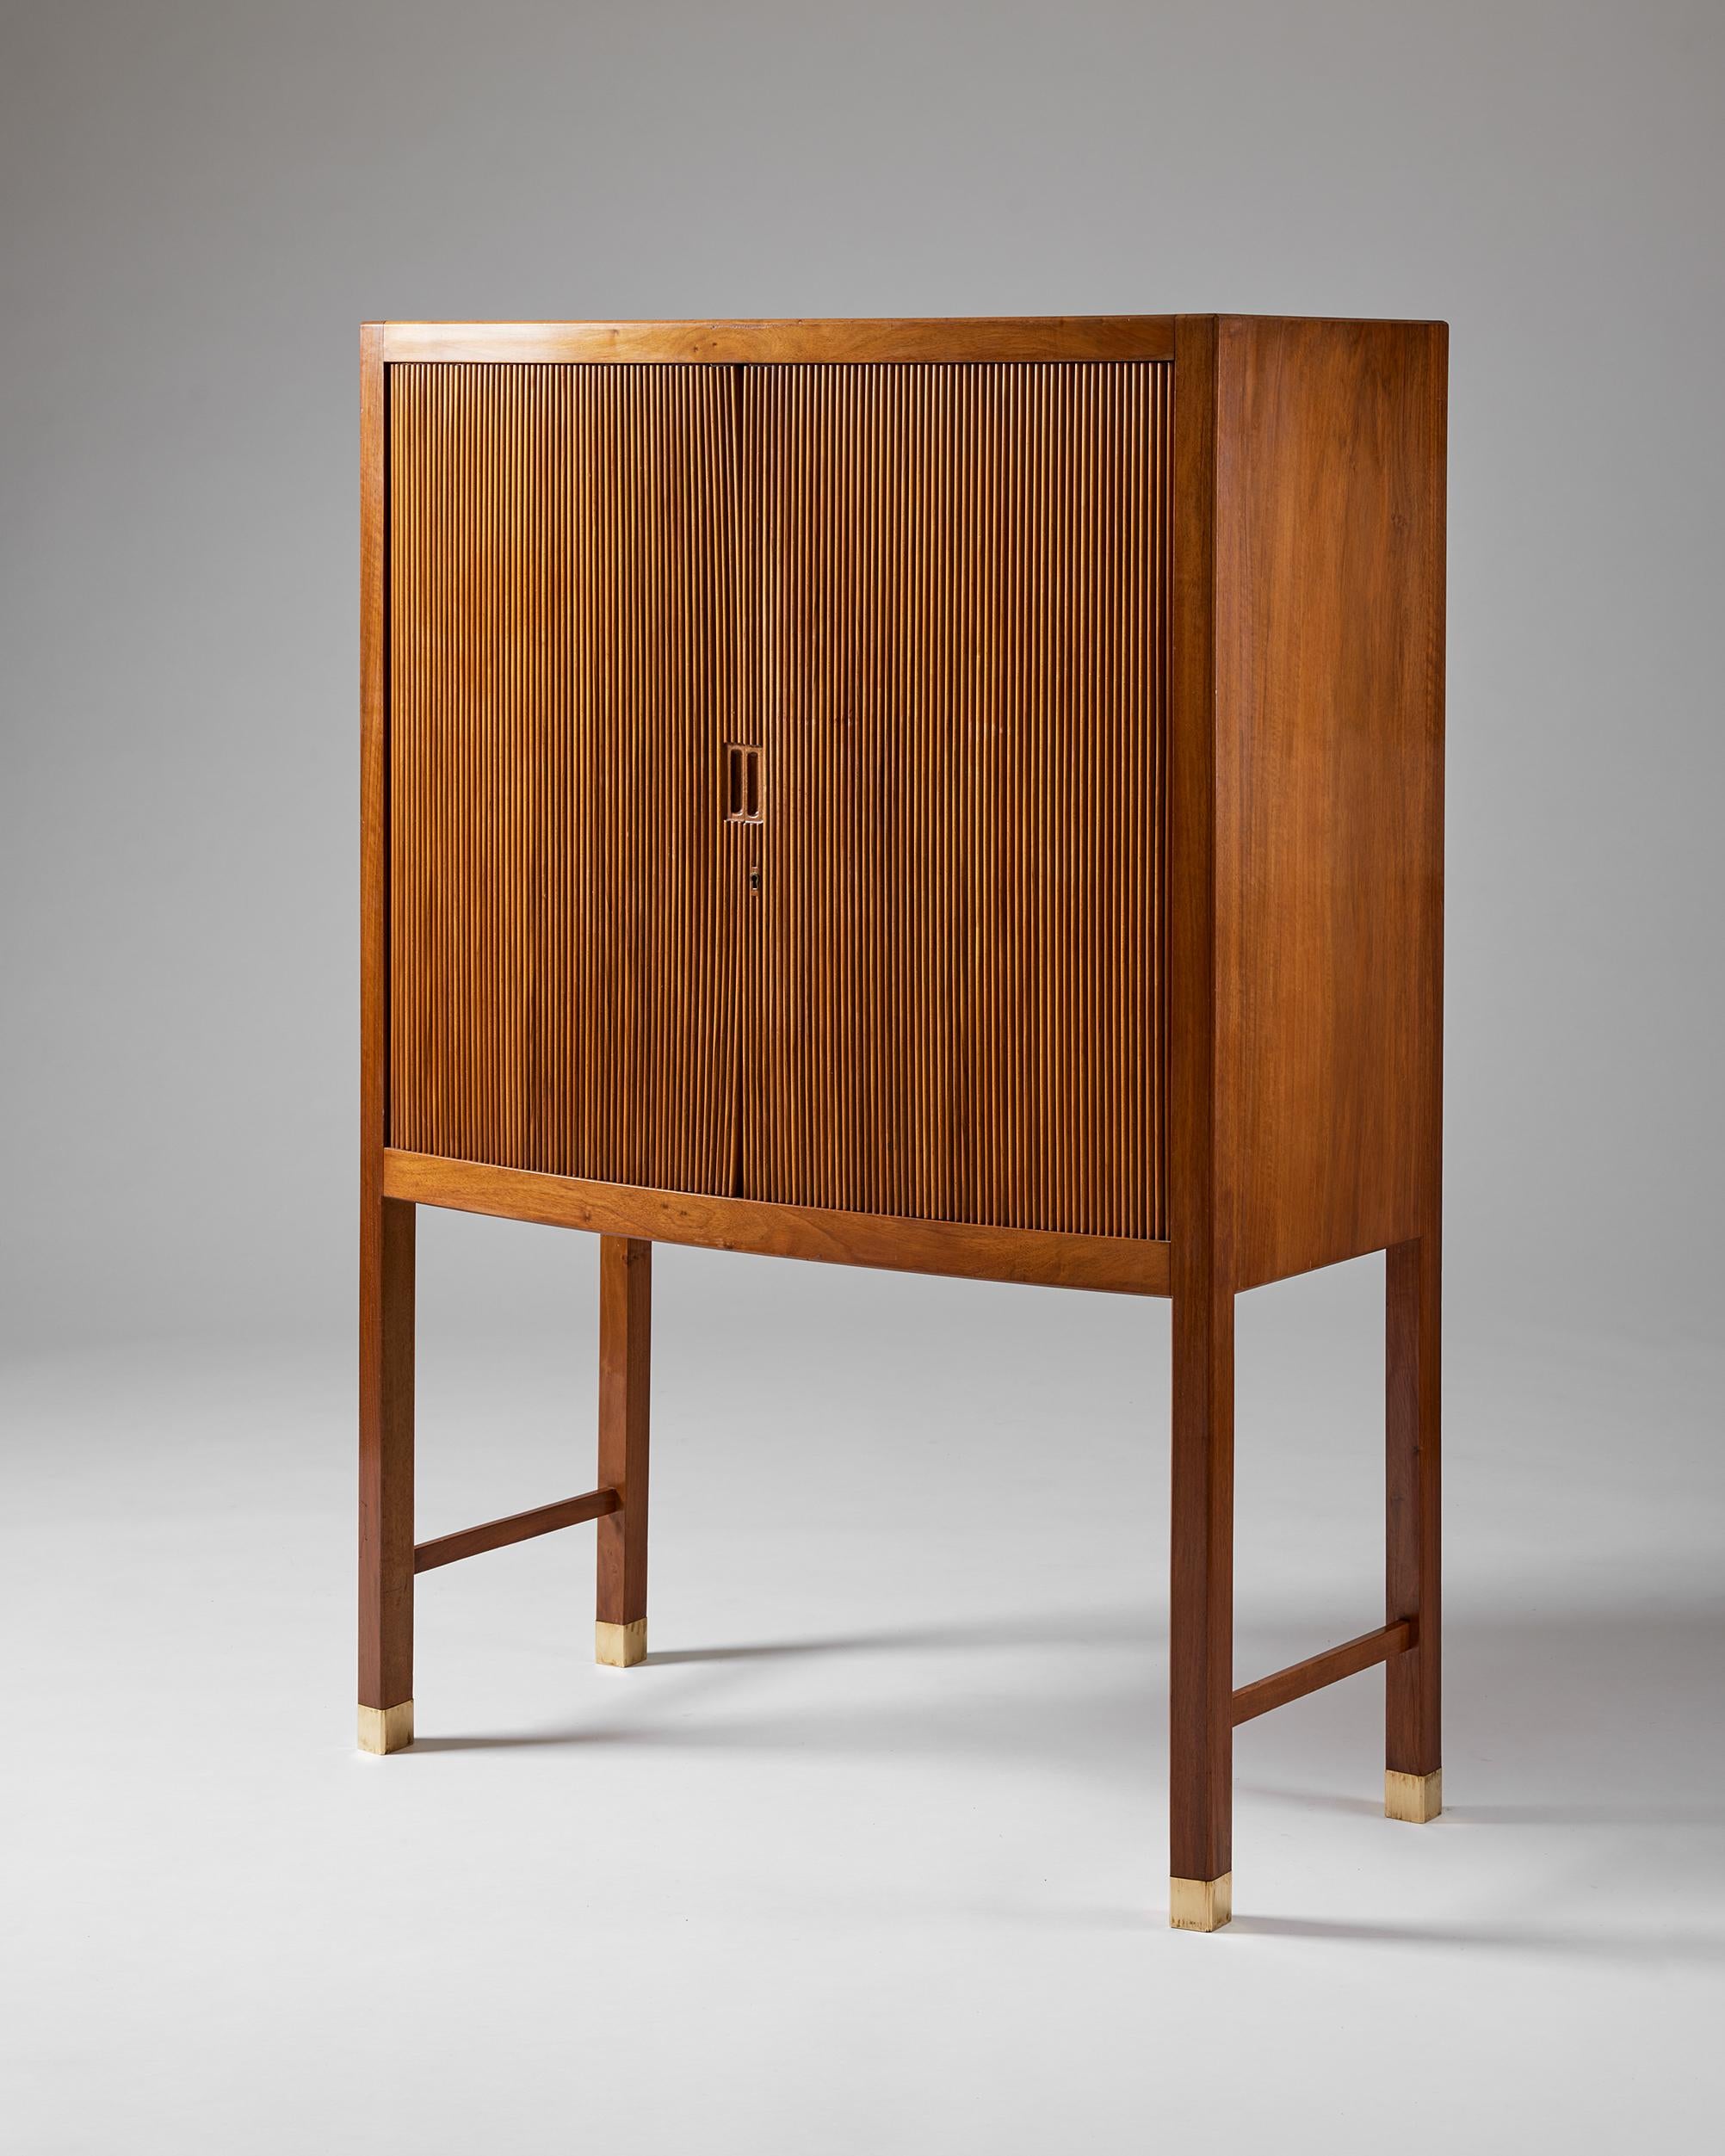 Mid-Century Modern Cabinet with Tambour Doors Designed by a Danish Cabinetmaker, Denmark, 1950s For Sale